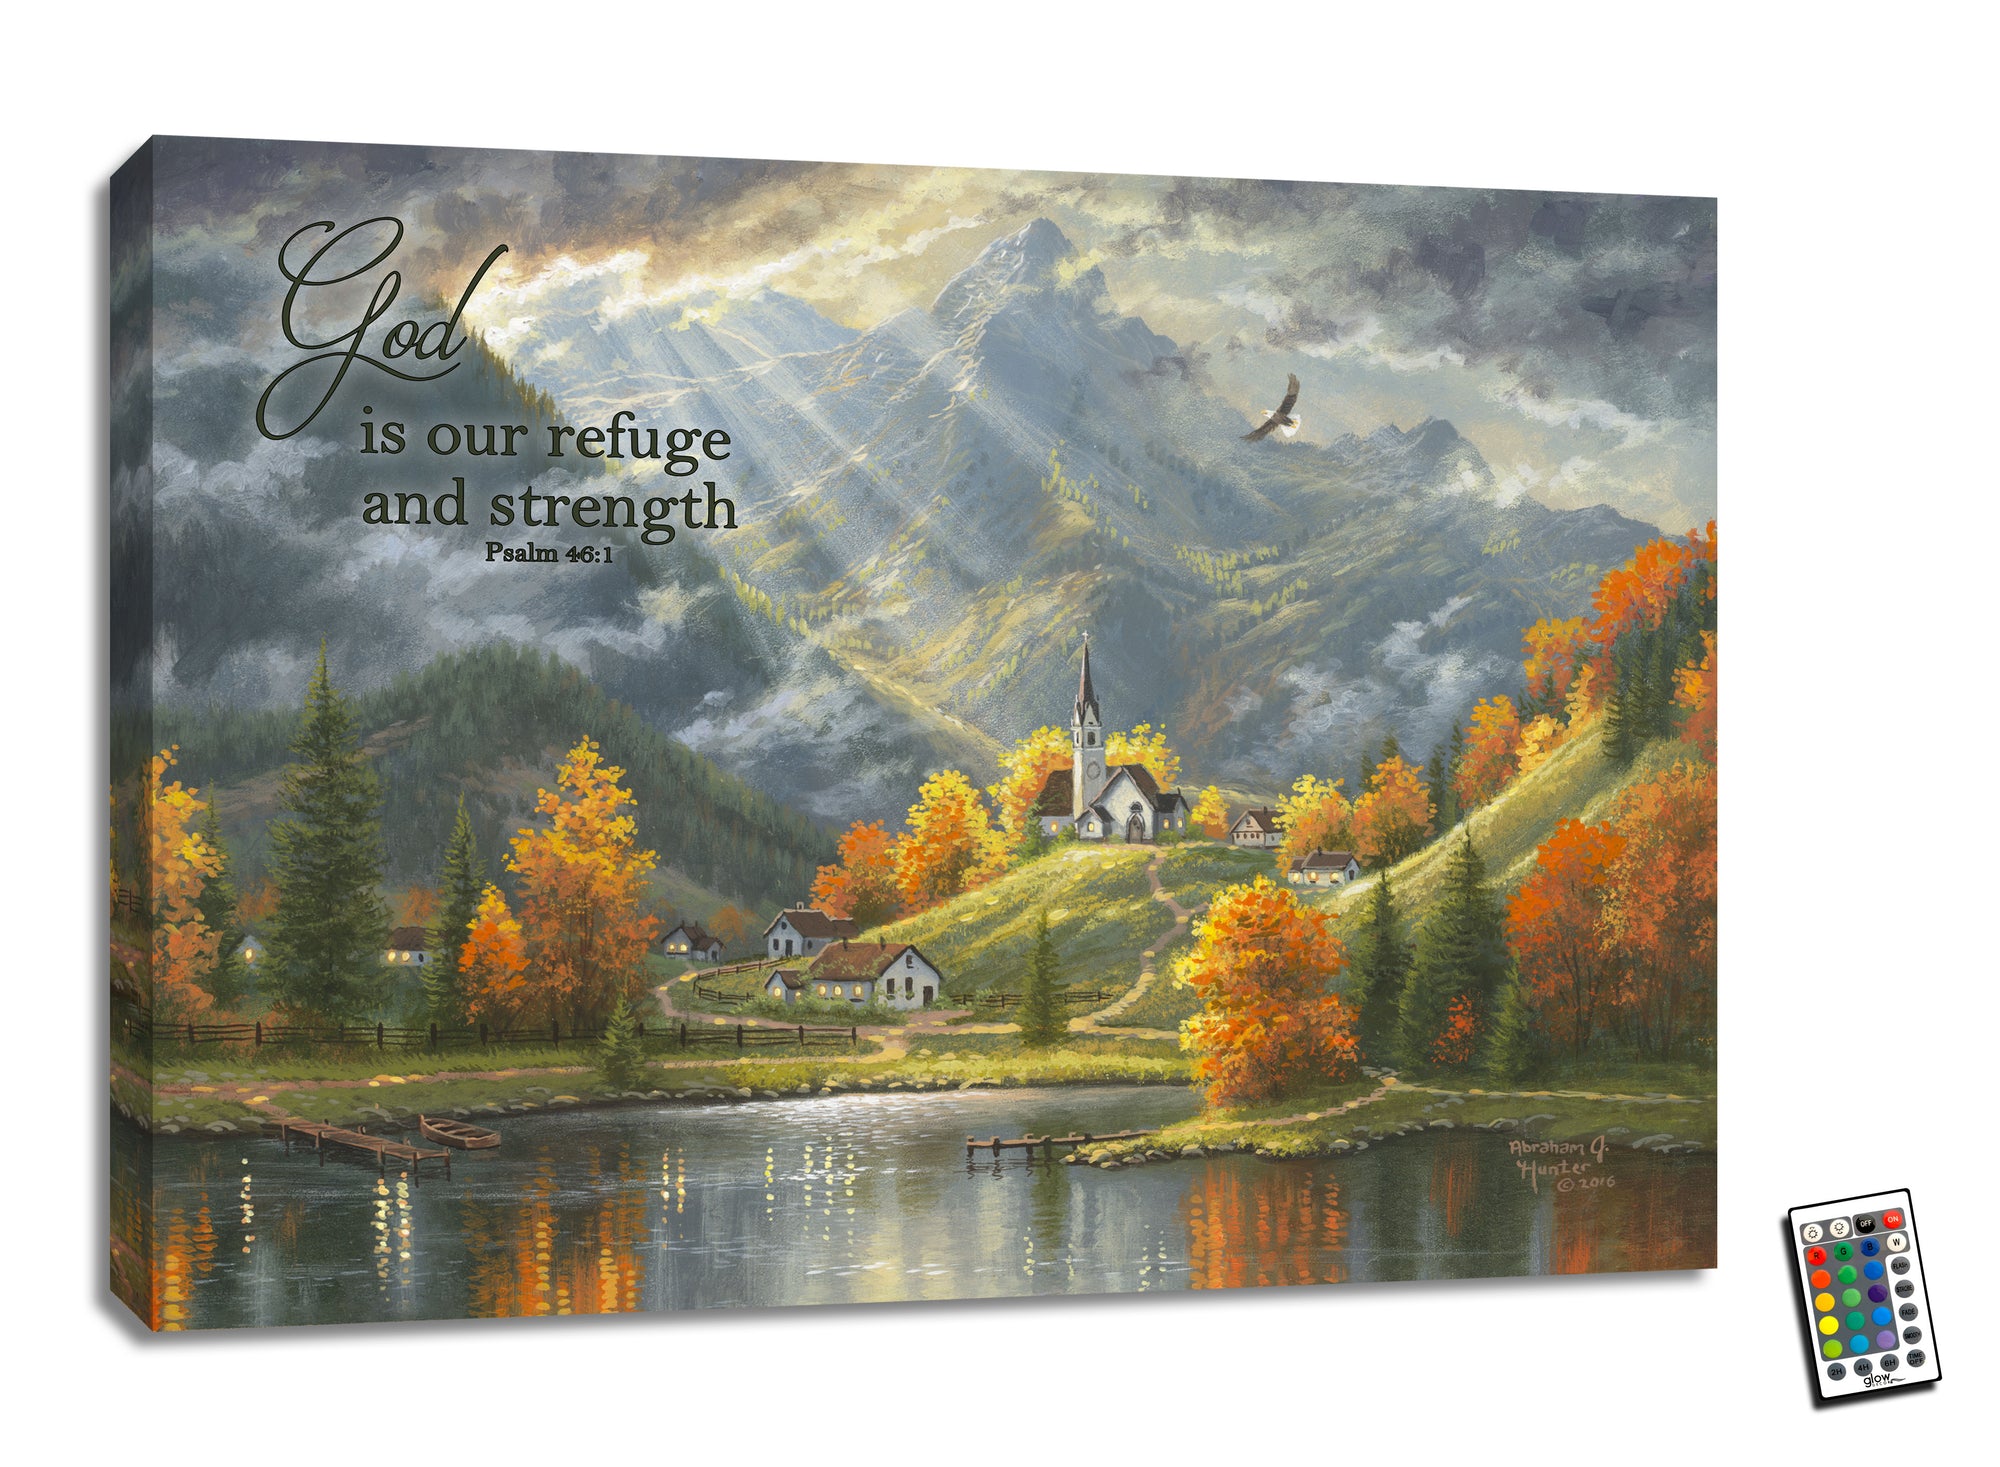 In Spirit in Truth with Scripture 18x24 Fully Illuminated LED Wall Art